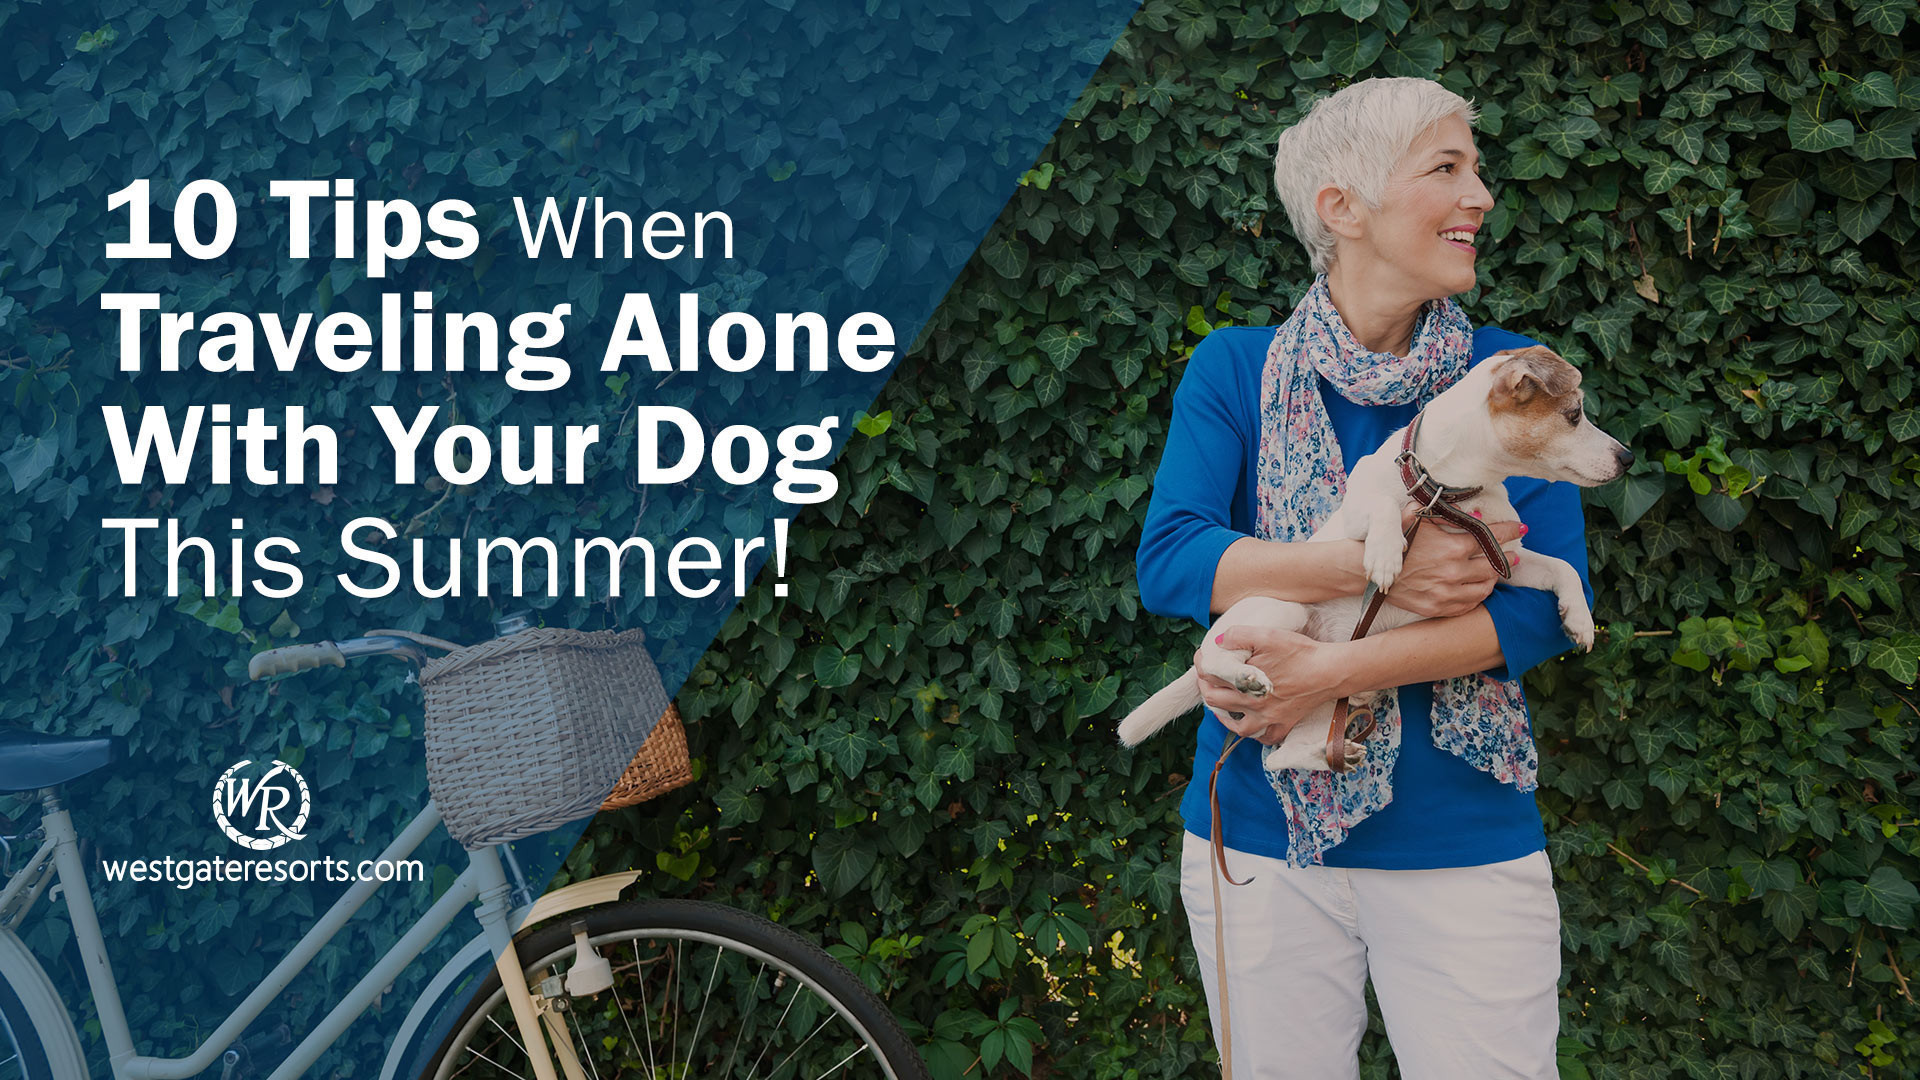 10 Tips When Traveling Alone With Your Dog This Summer | Dog-Friendly Travel Tips